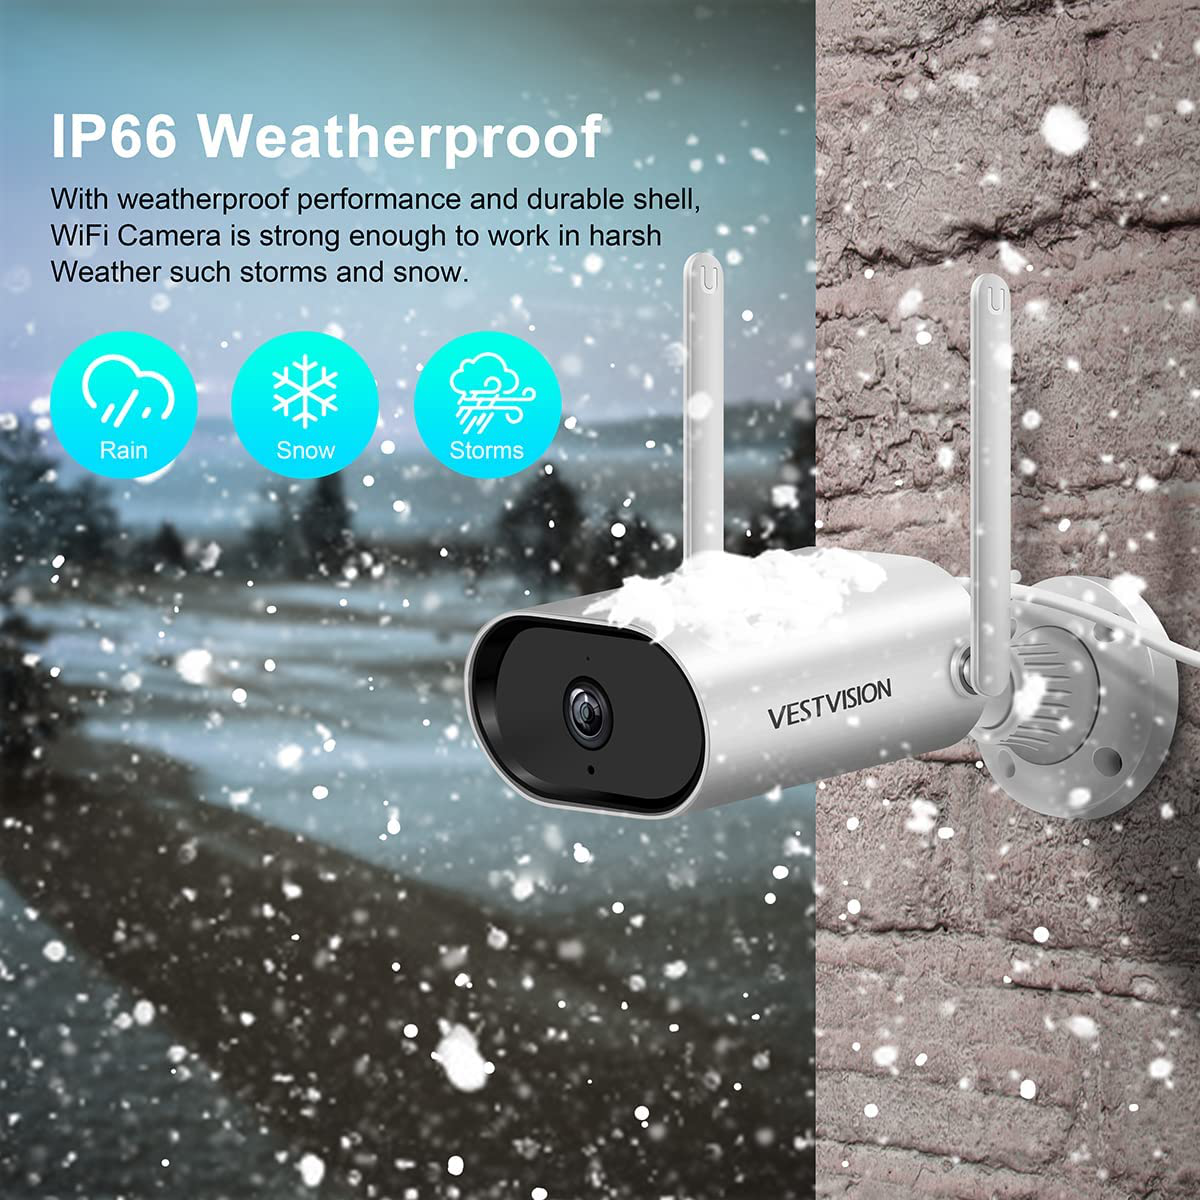 Outdoor Security Cameras FHD 1080P, Night Vision Security Cameras Wireless Outdoor, IP66 Weatherproof for Outdoor Indoor Motion Detection Wireless Cameras for Home Security, 2-Way Audio, 2.4G Wifi